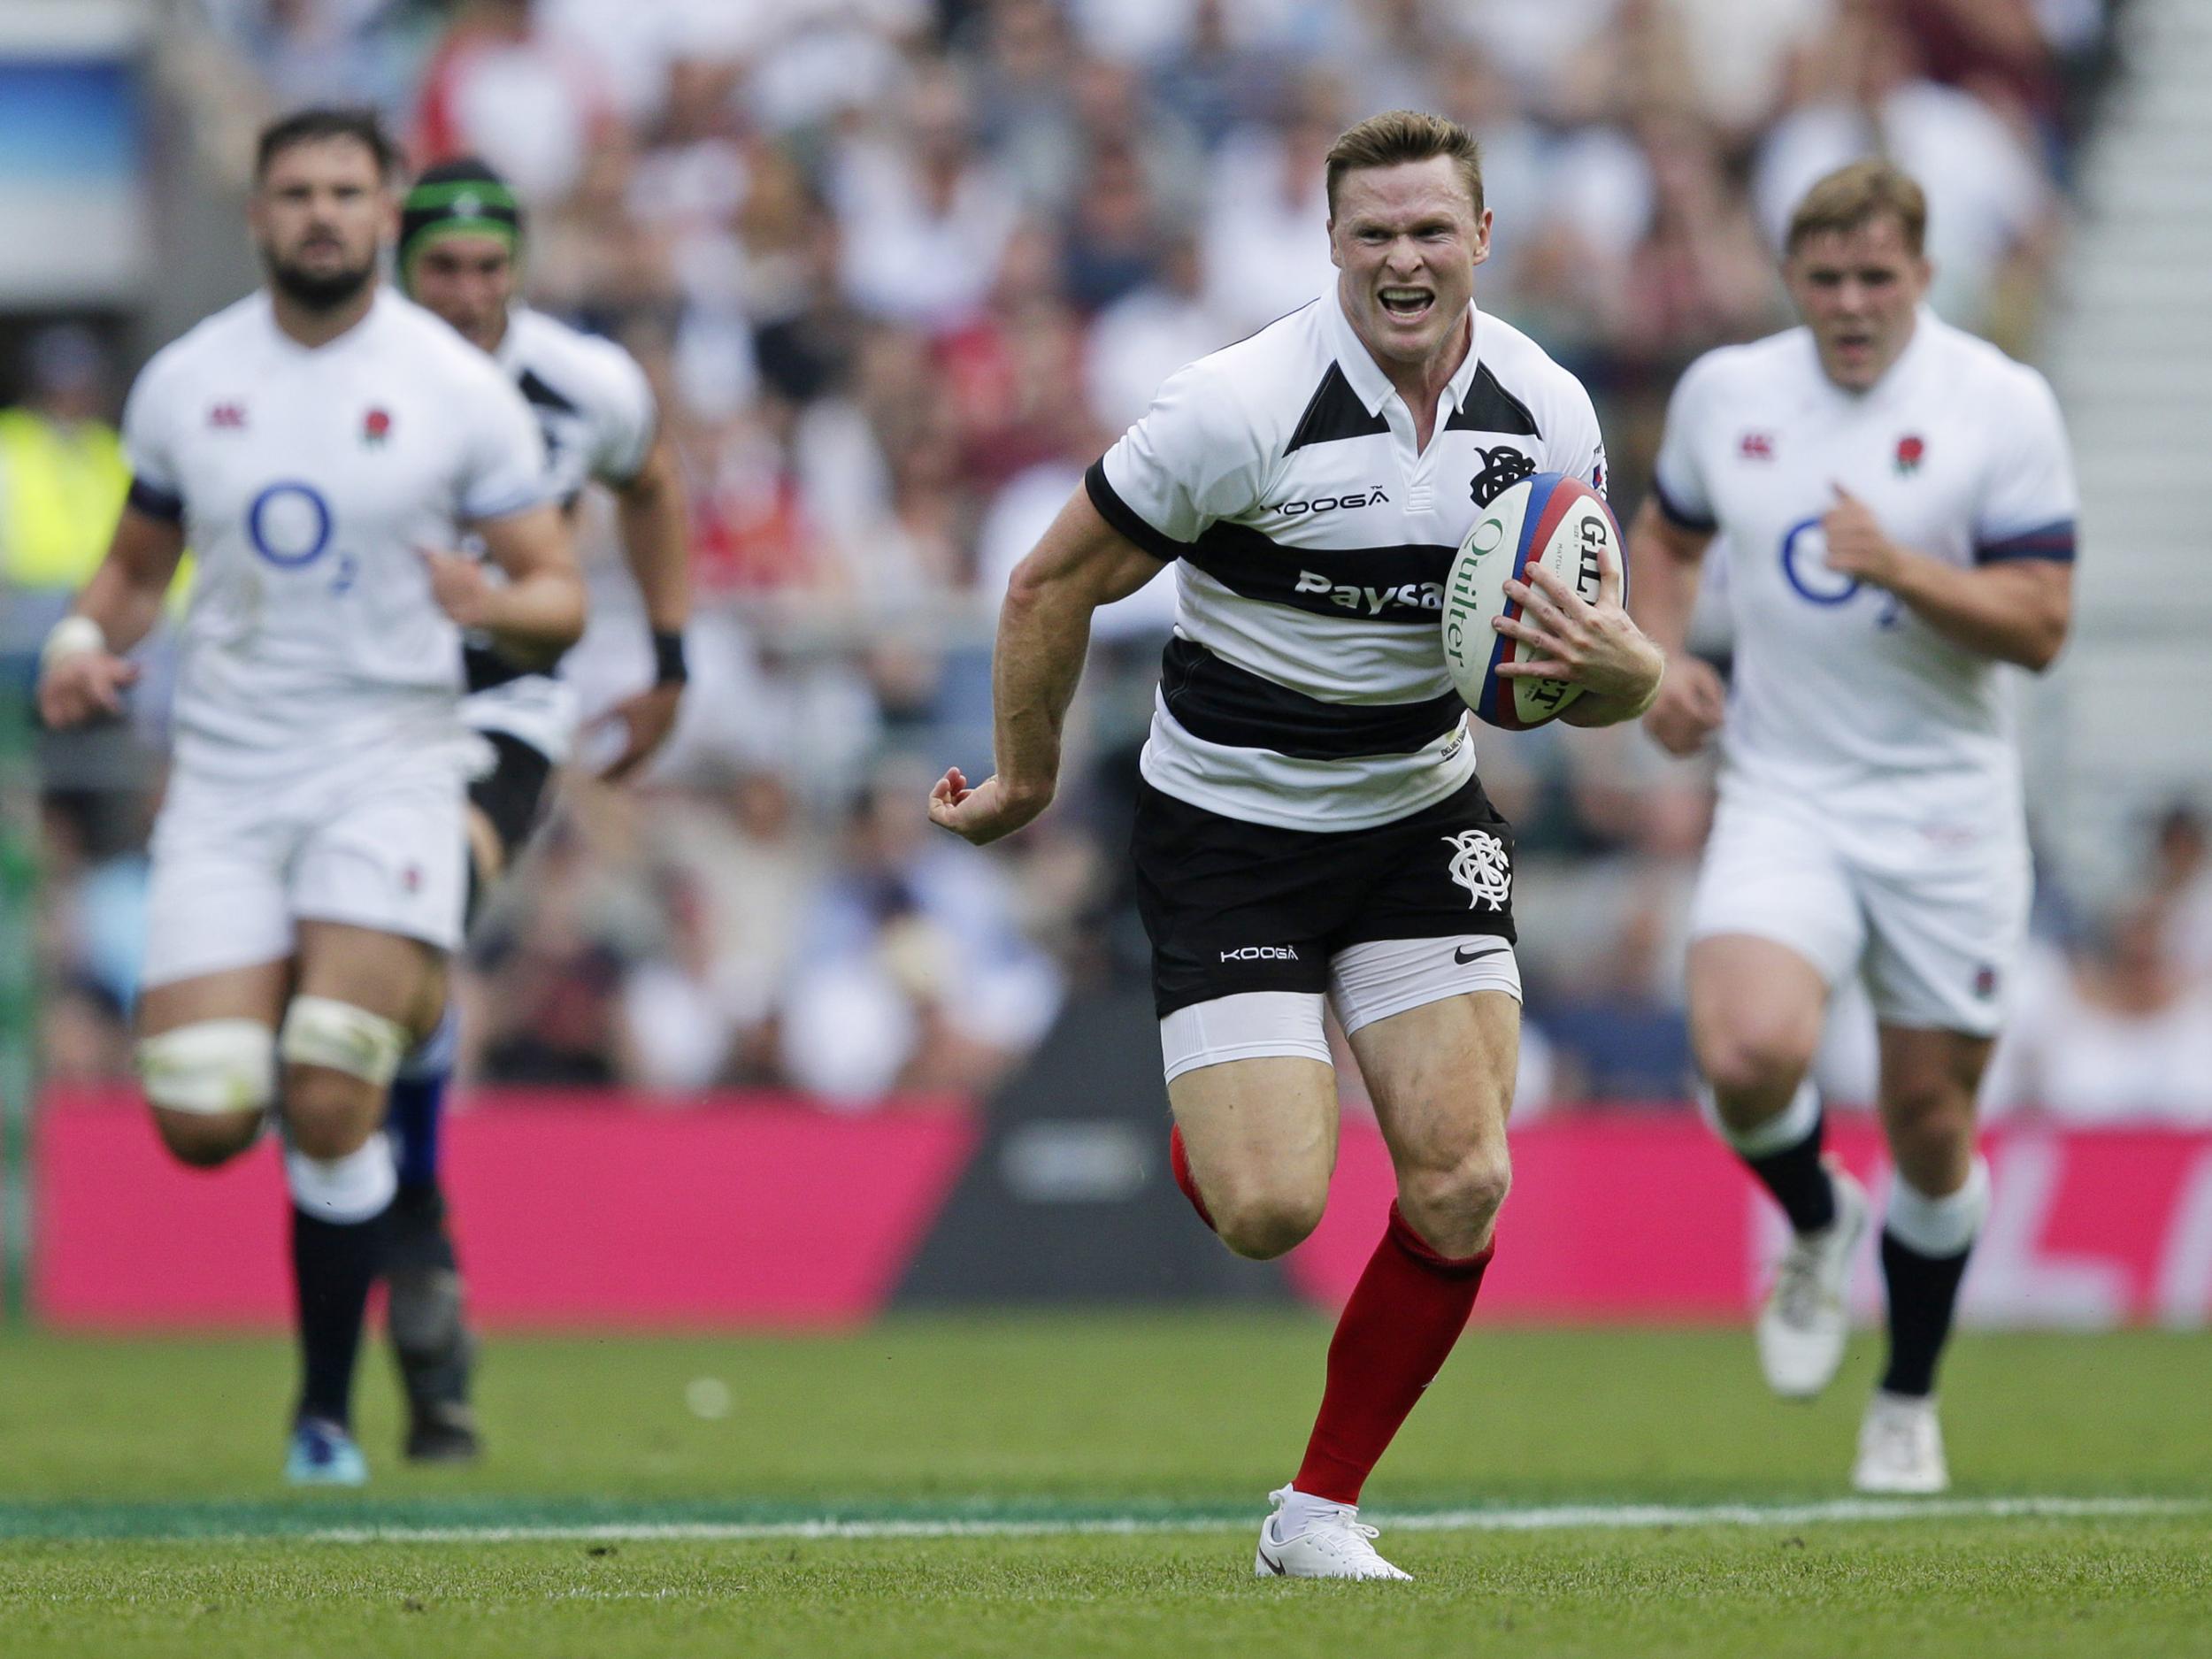 Ashton scored a hat-trick for the Barbarians against England last month